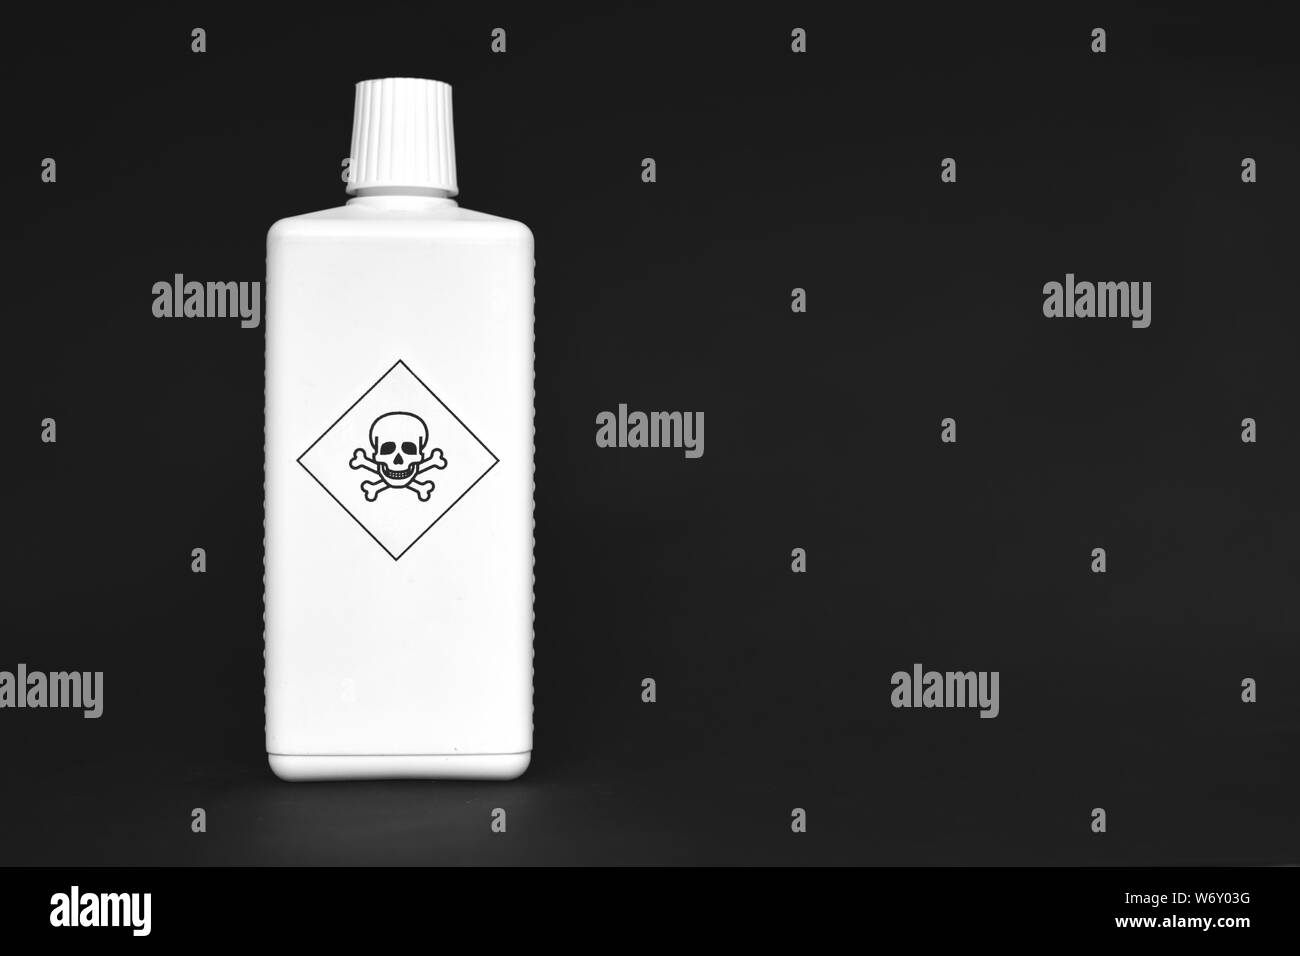 White bottle with poison warning signs on them on black background Stock Photo